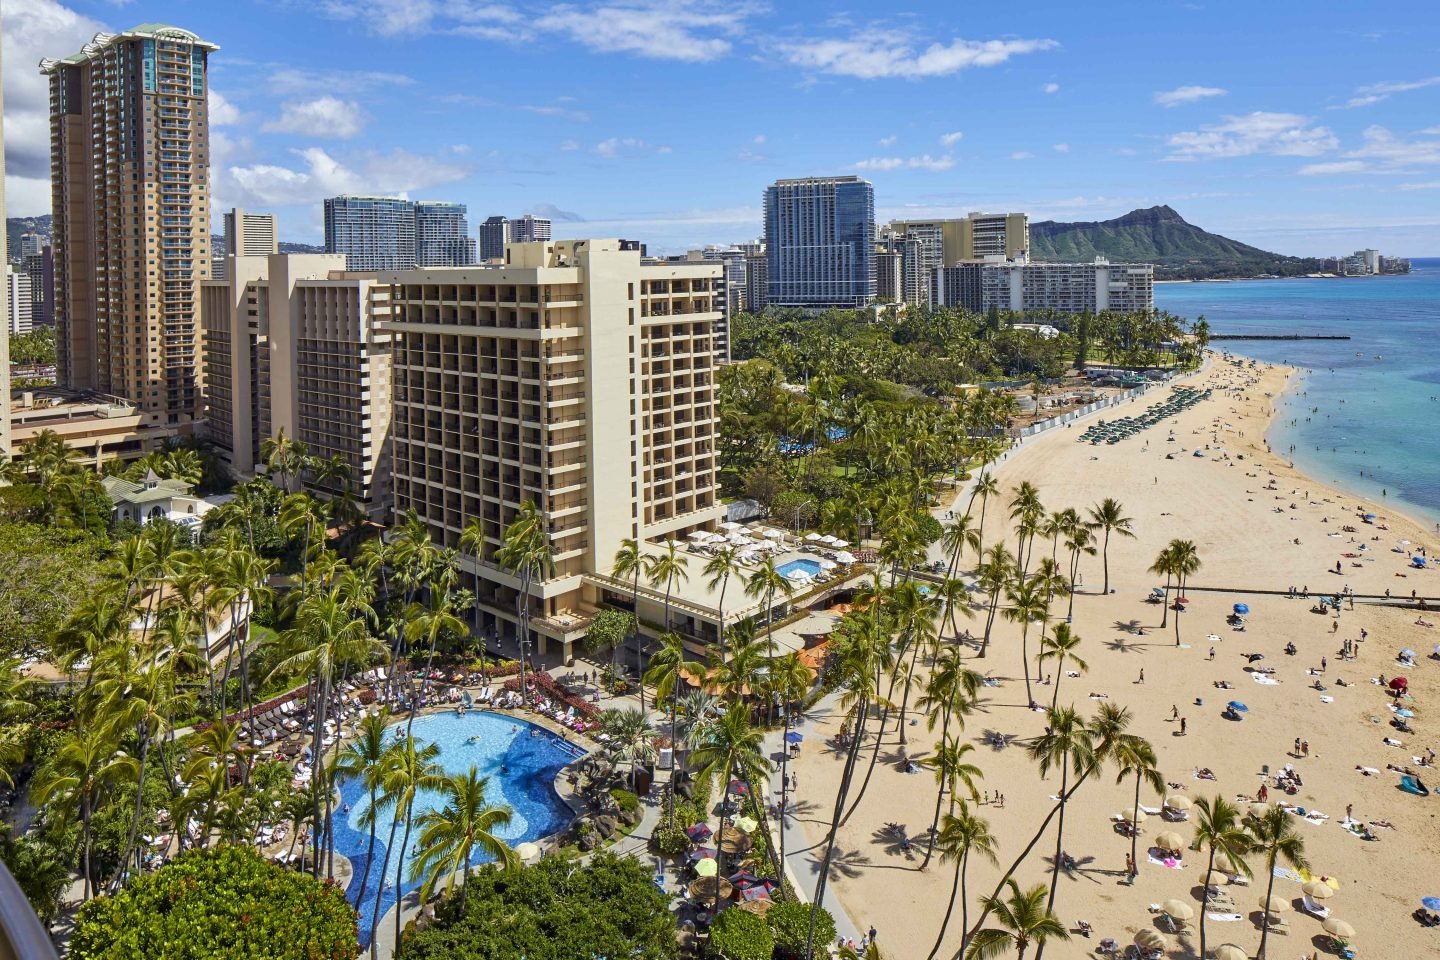 hawaii trip for two